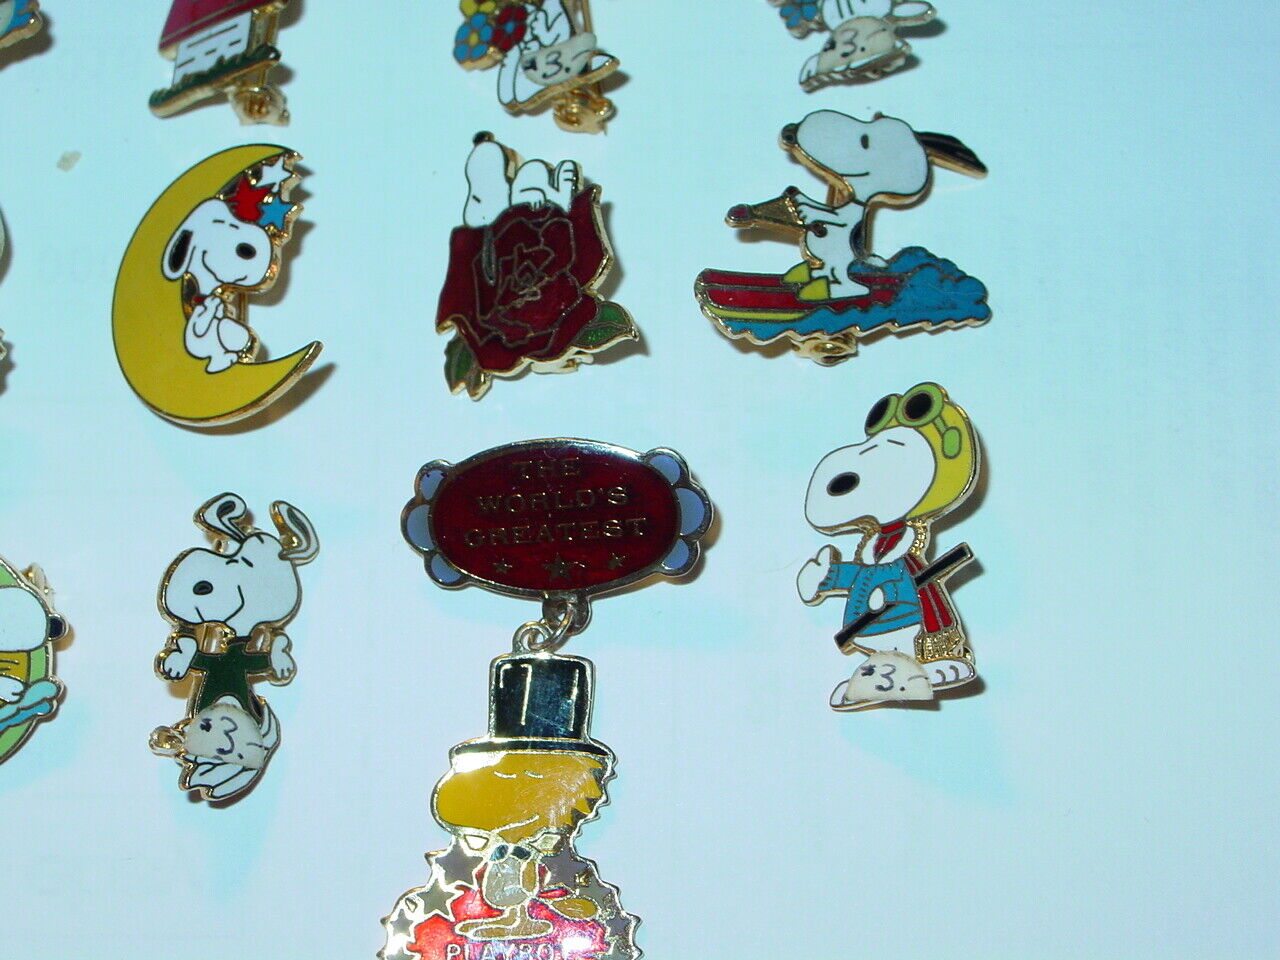 PEANUTS SNOOPY VINTAGE 1970's ENAMEL PIN COLLECTION LOT of 12 NOS N/M #4